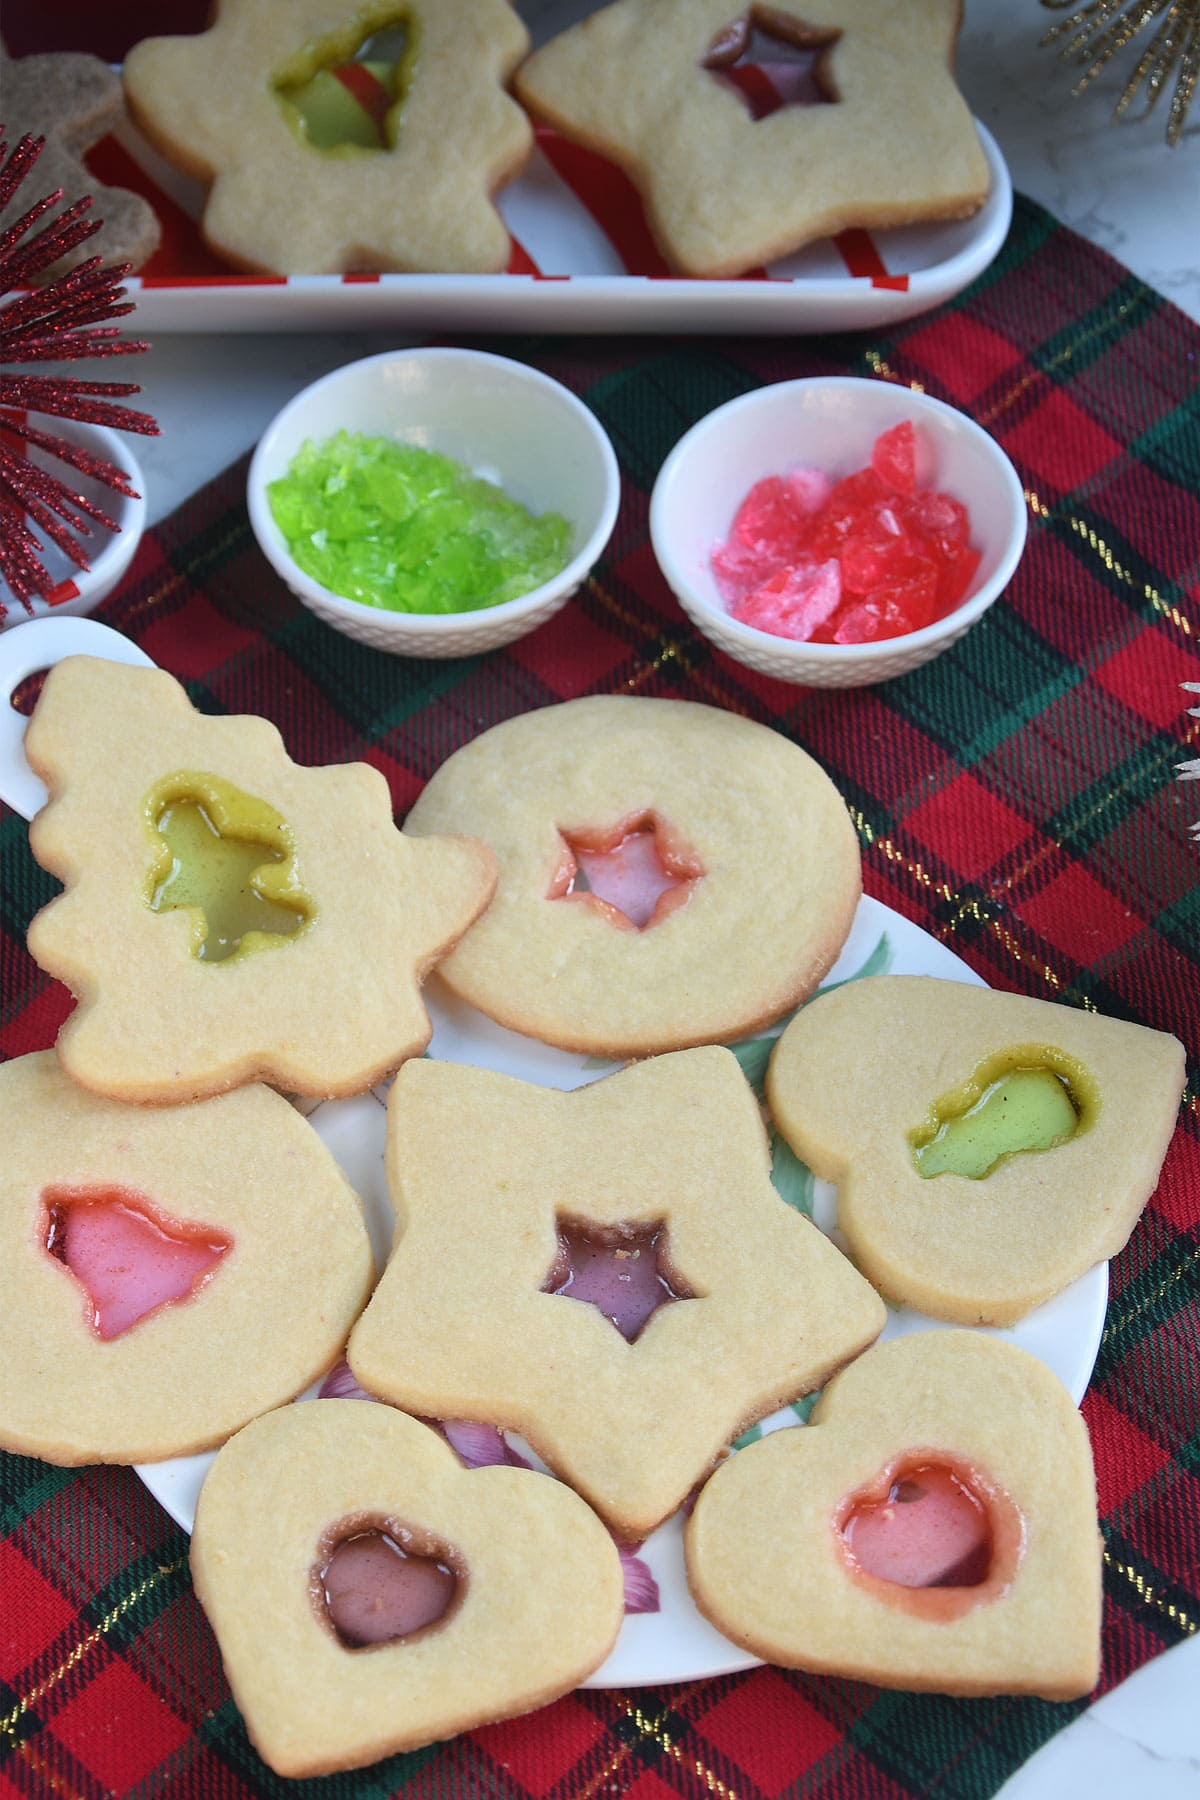 Stained glass cookies in a serving tray.